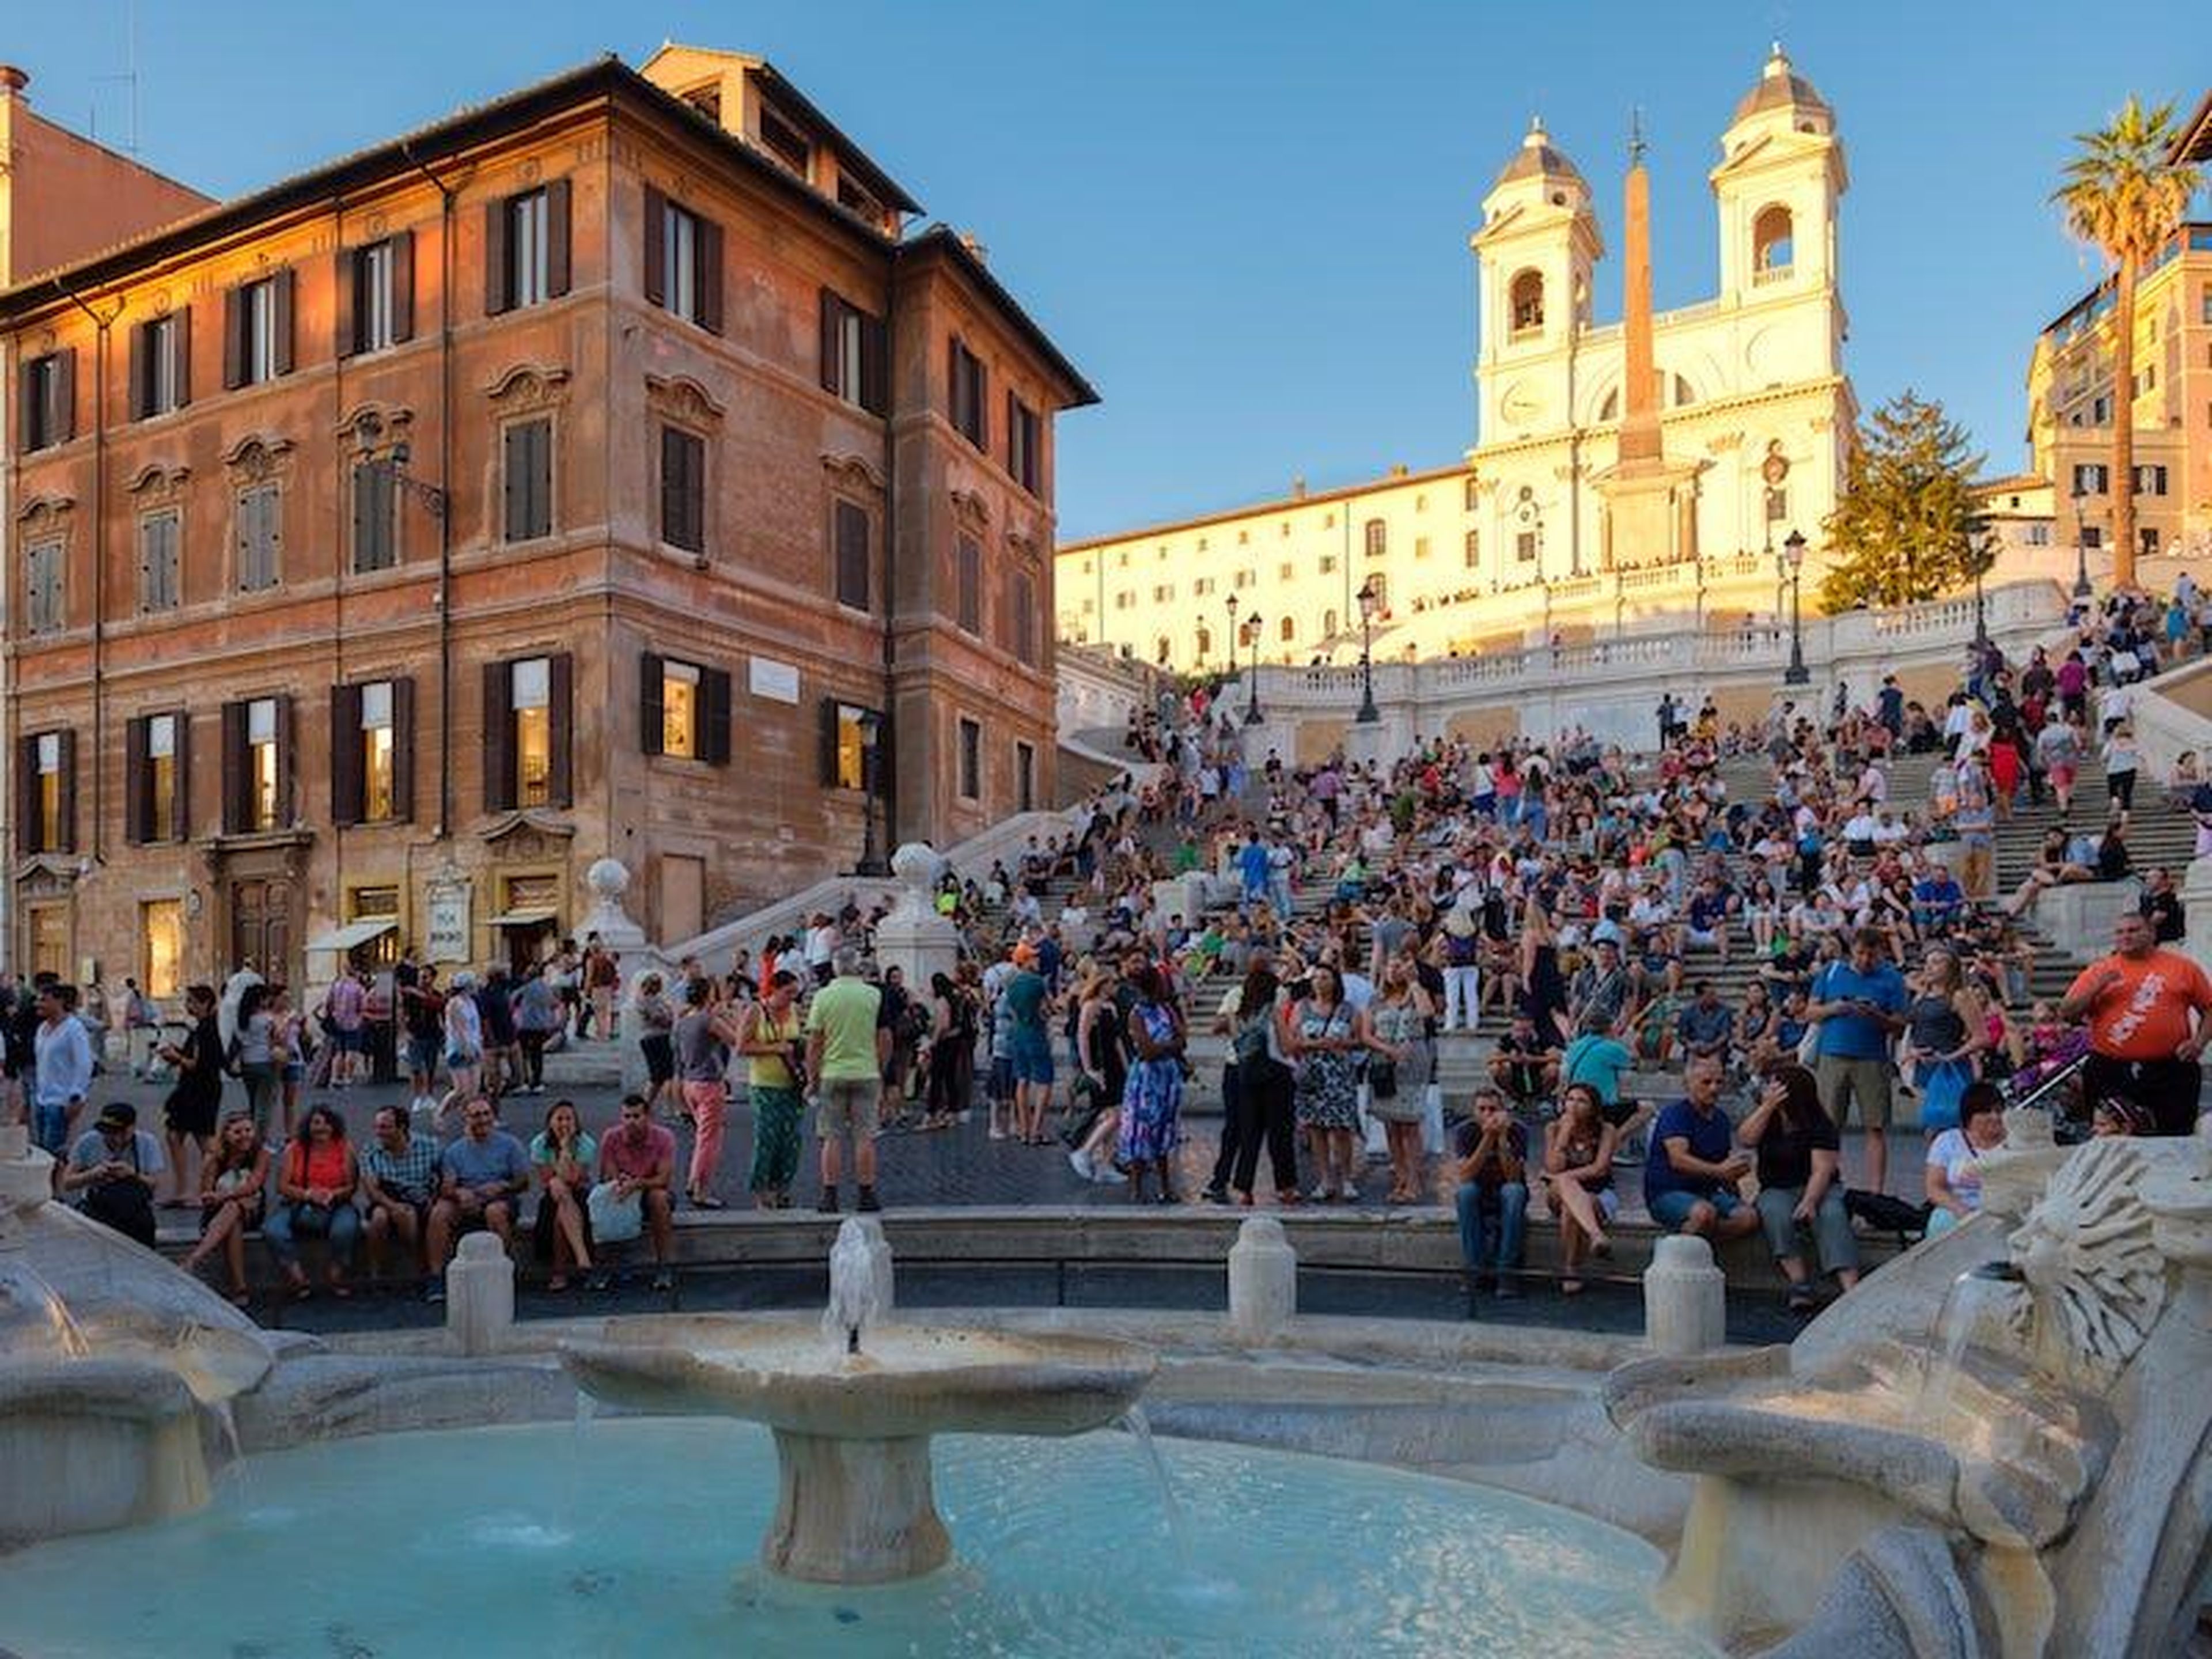 BEFORE: People love taking photos at the Spanish Steps in Rome.